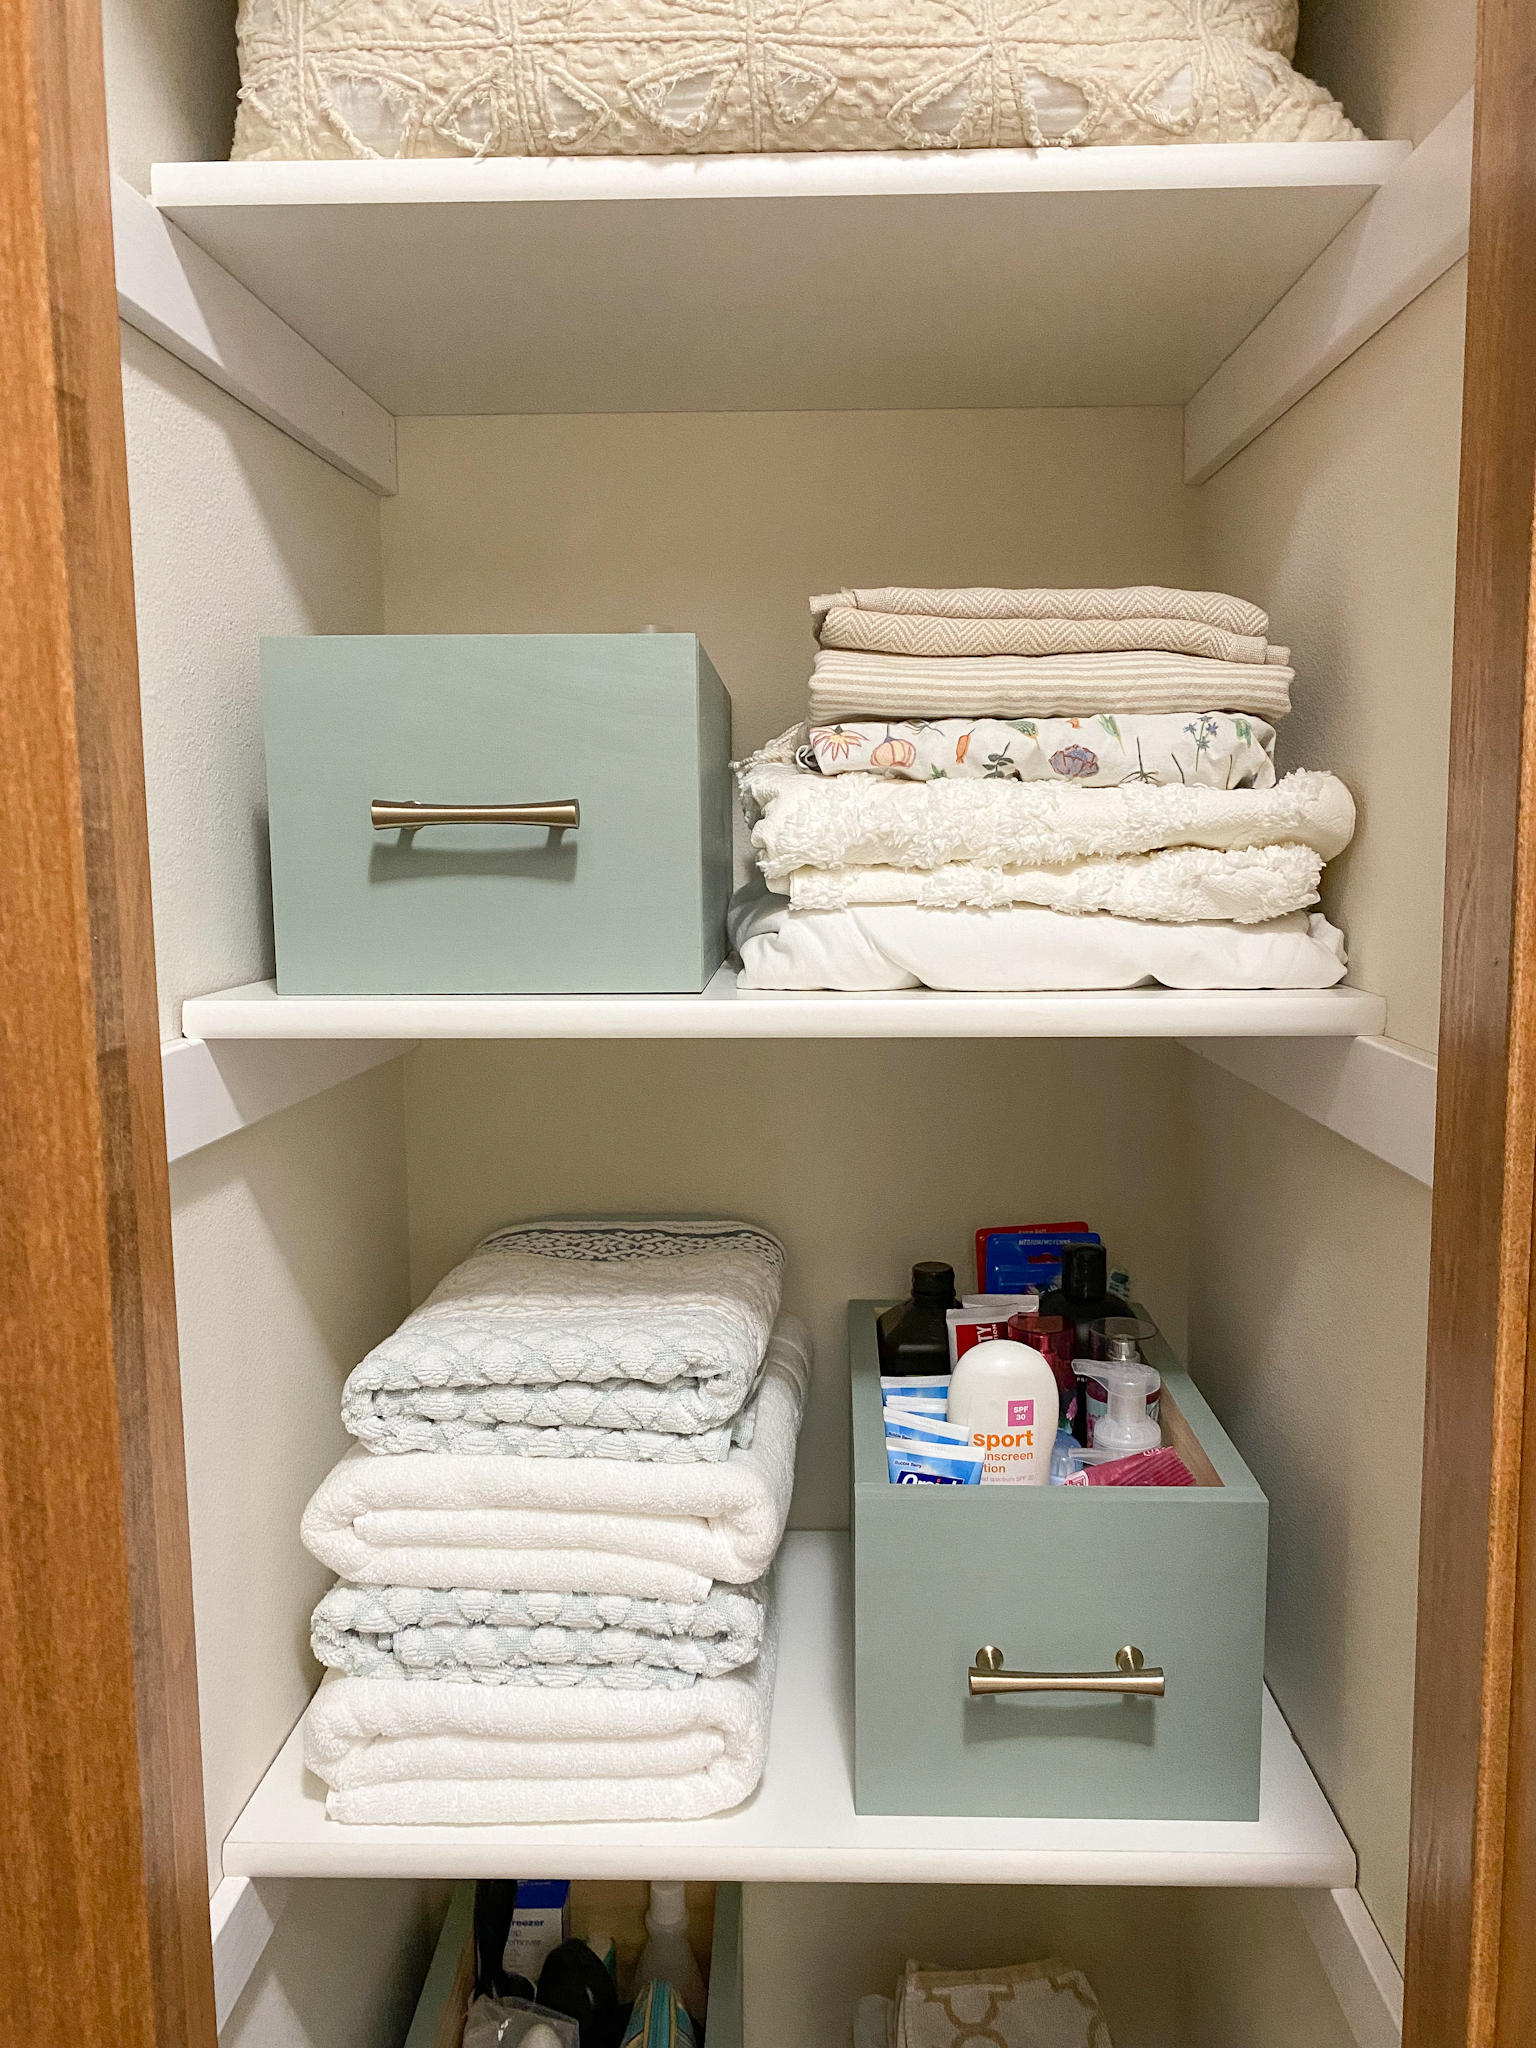 Linen Closet Organization Makeover in just ONE DAY! - The Handcrafted Haven